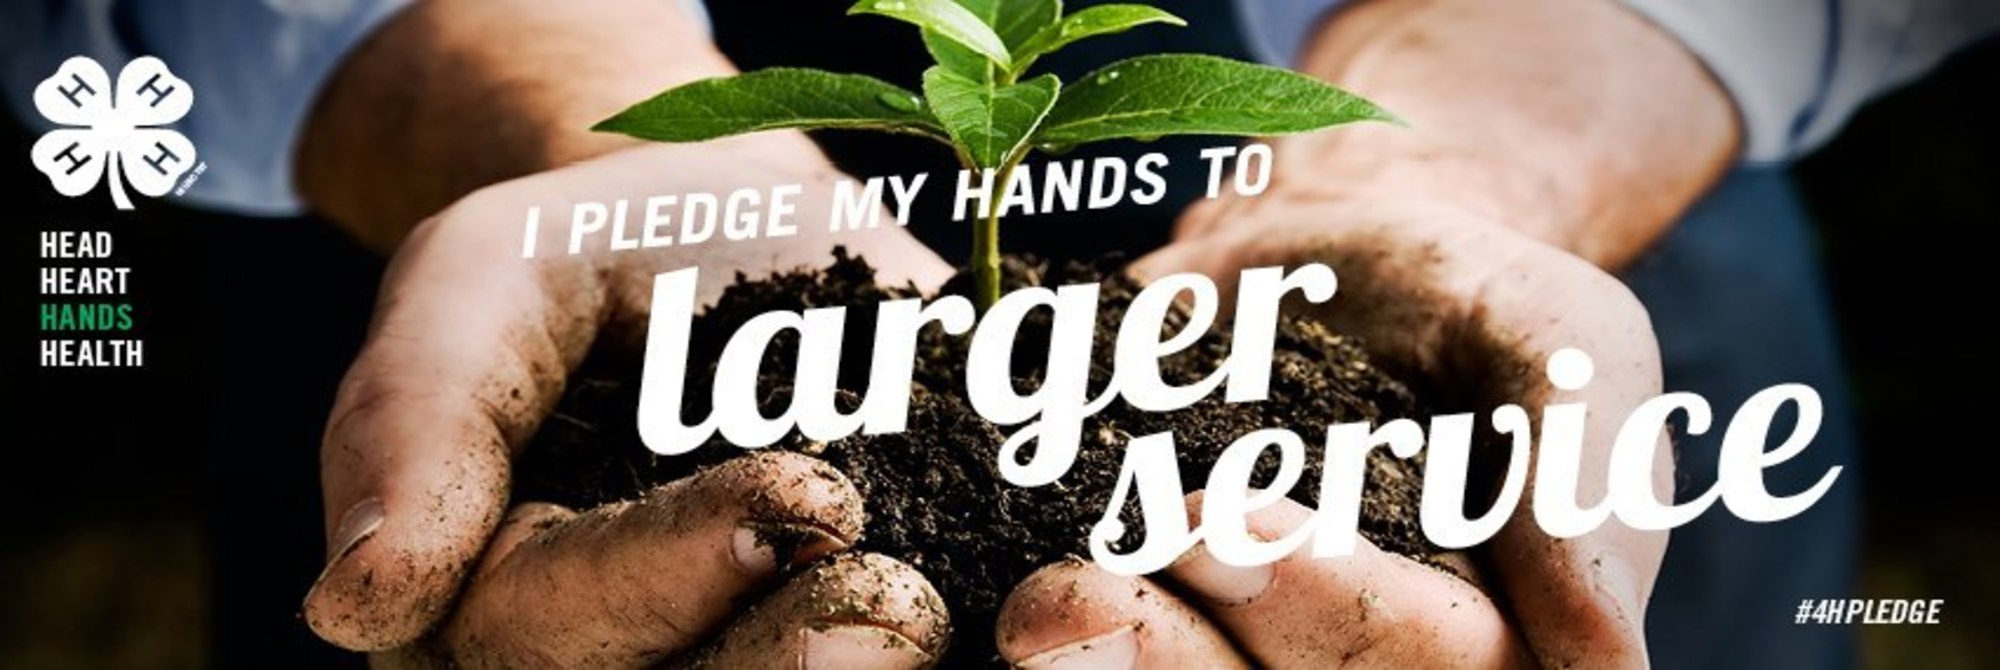 Hands to Larger Service logo